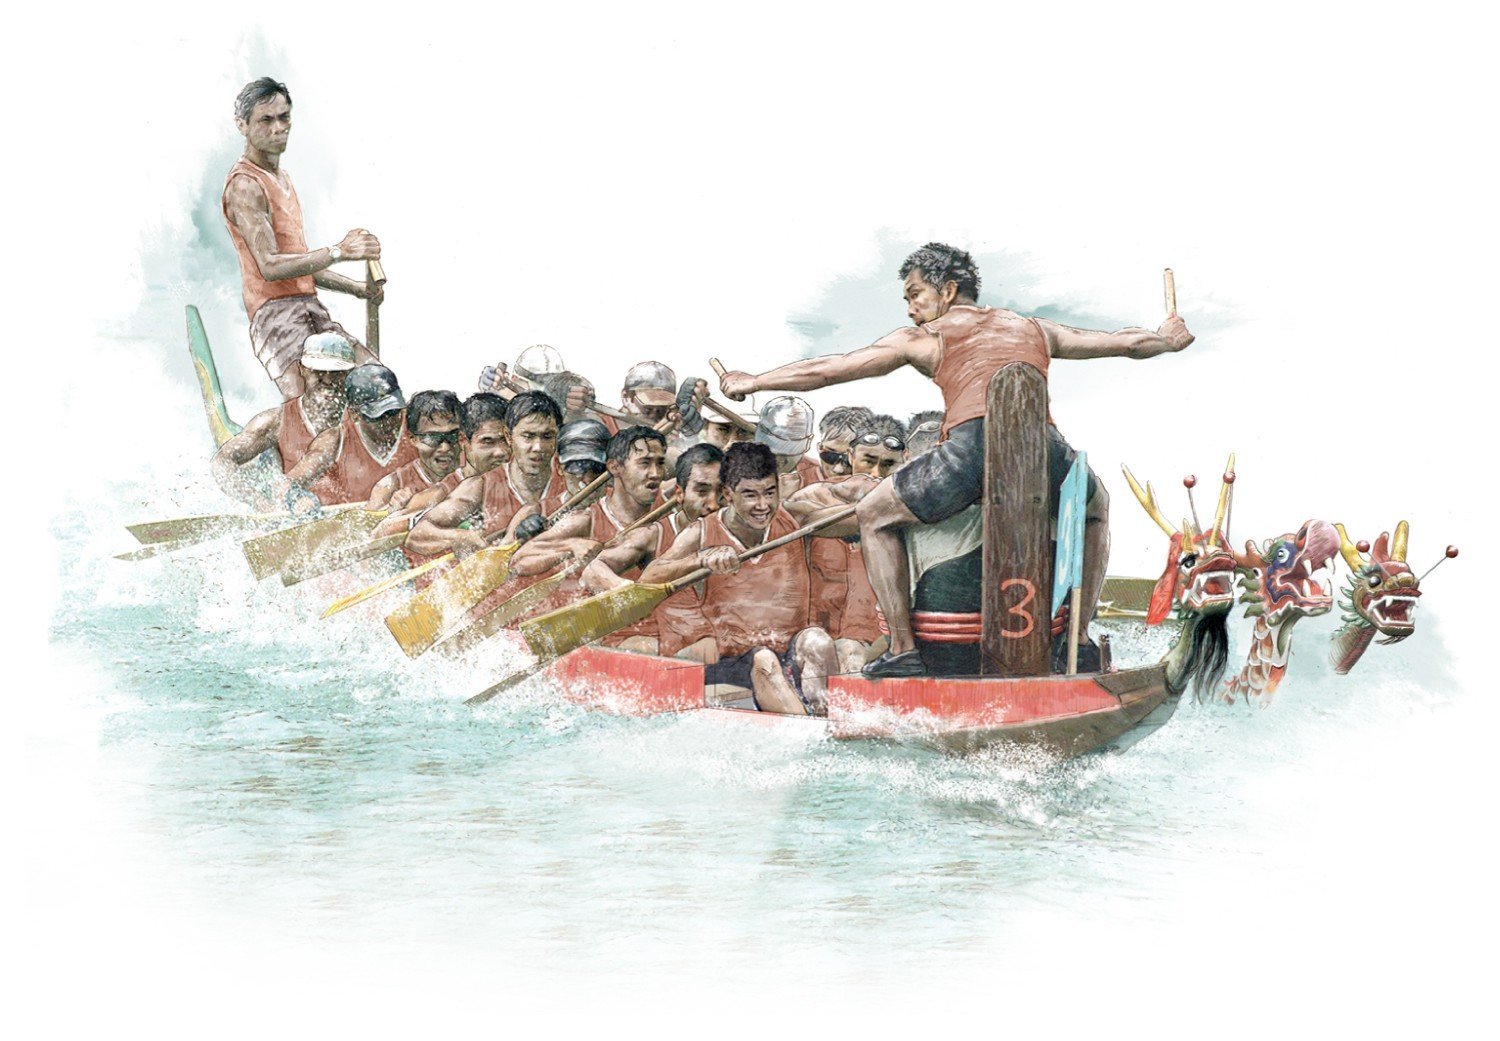 The crew of a dragon boat is assigned different places in a boat based on their individual strengths and aptitudes.